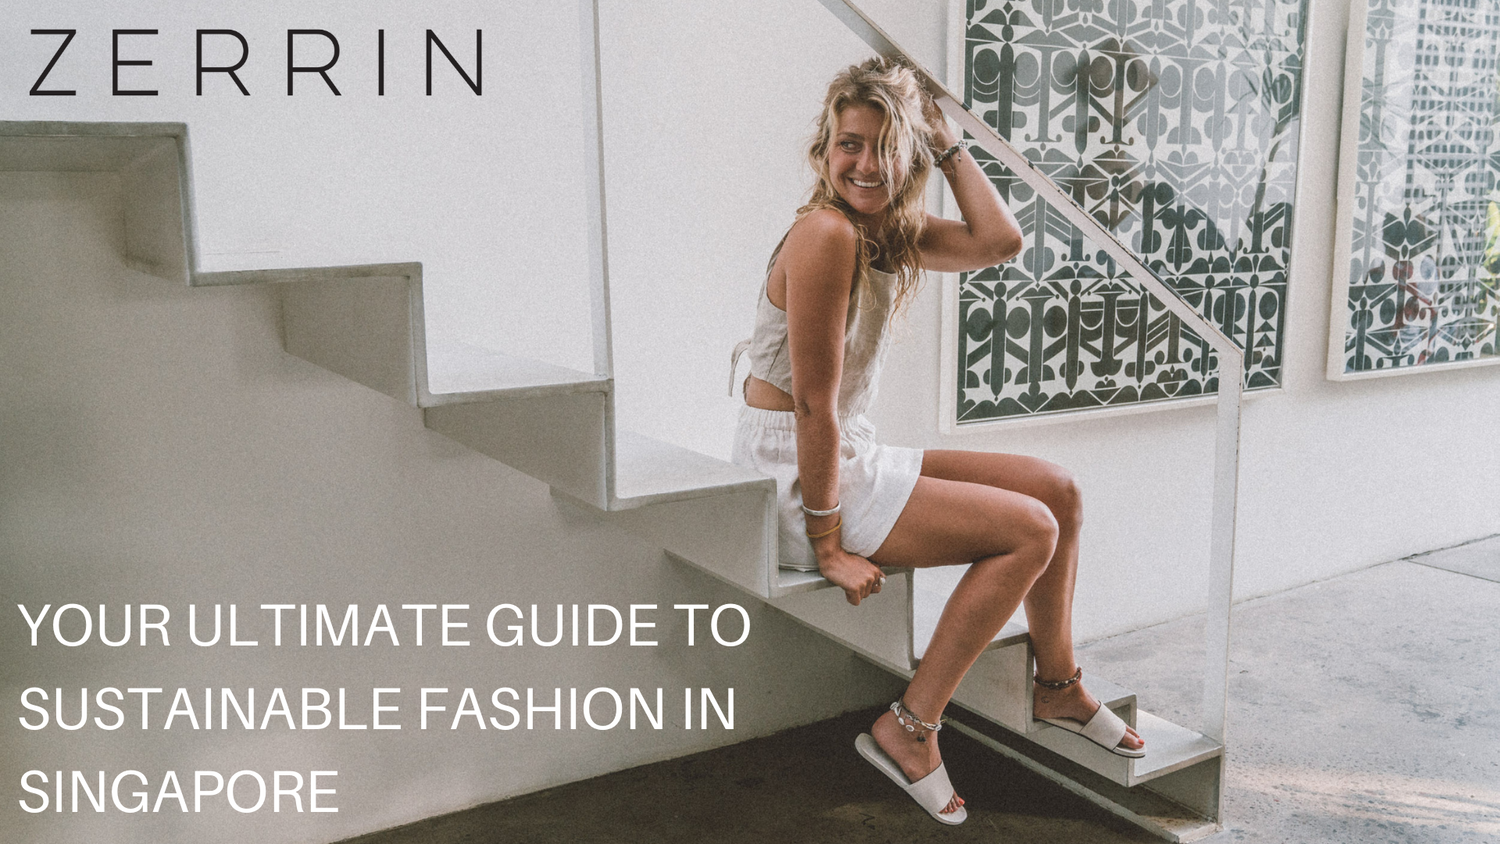 Your Go To Guide to Sustainable Fashion in Singapore - Zerrin & Susannah Jaffer